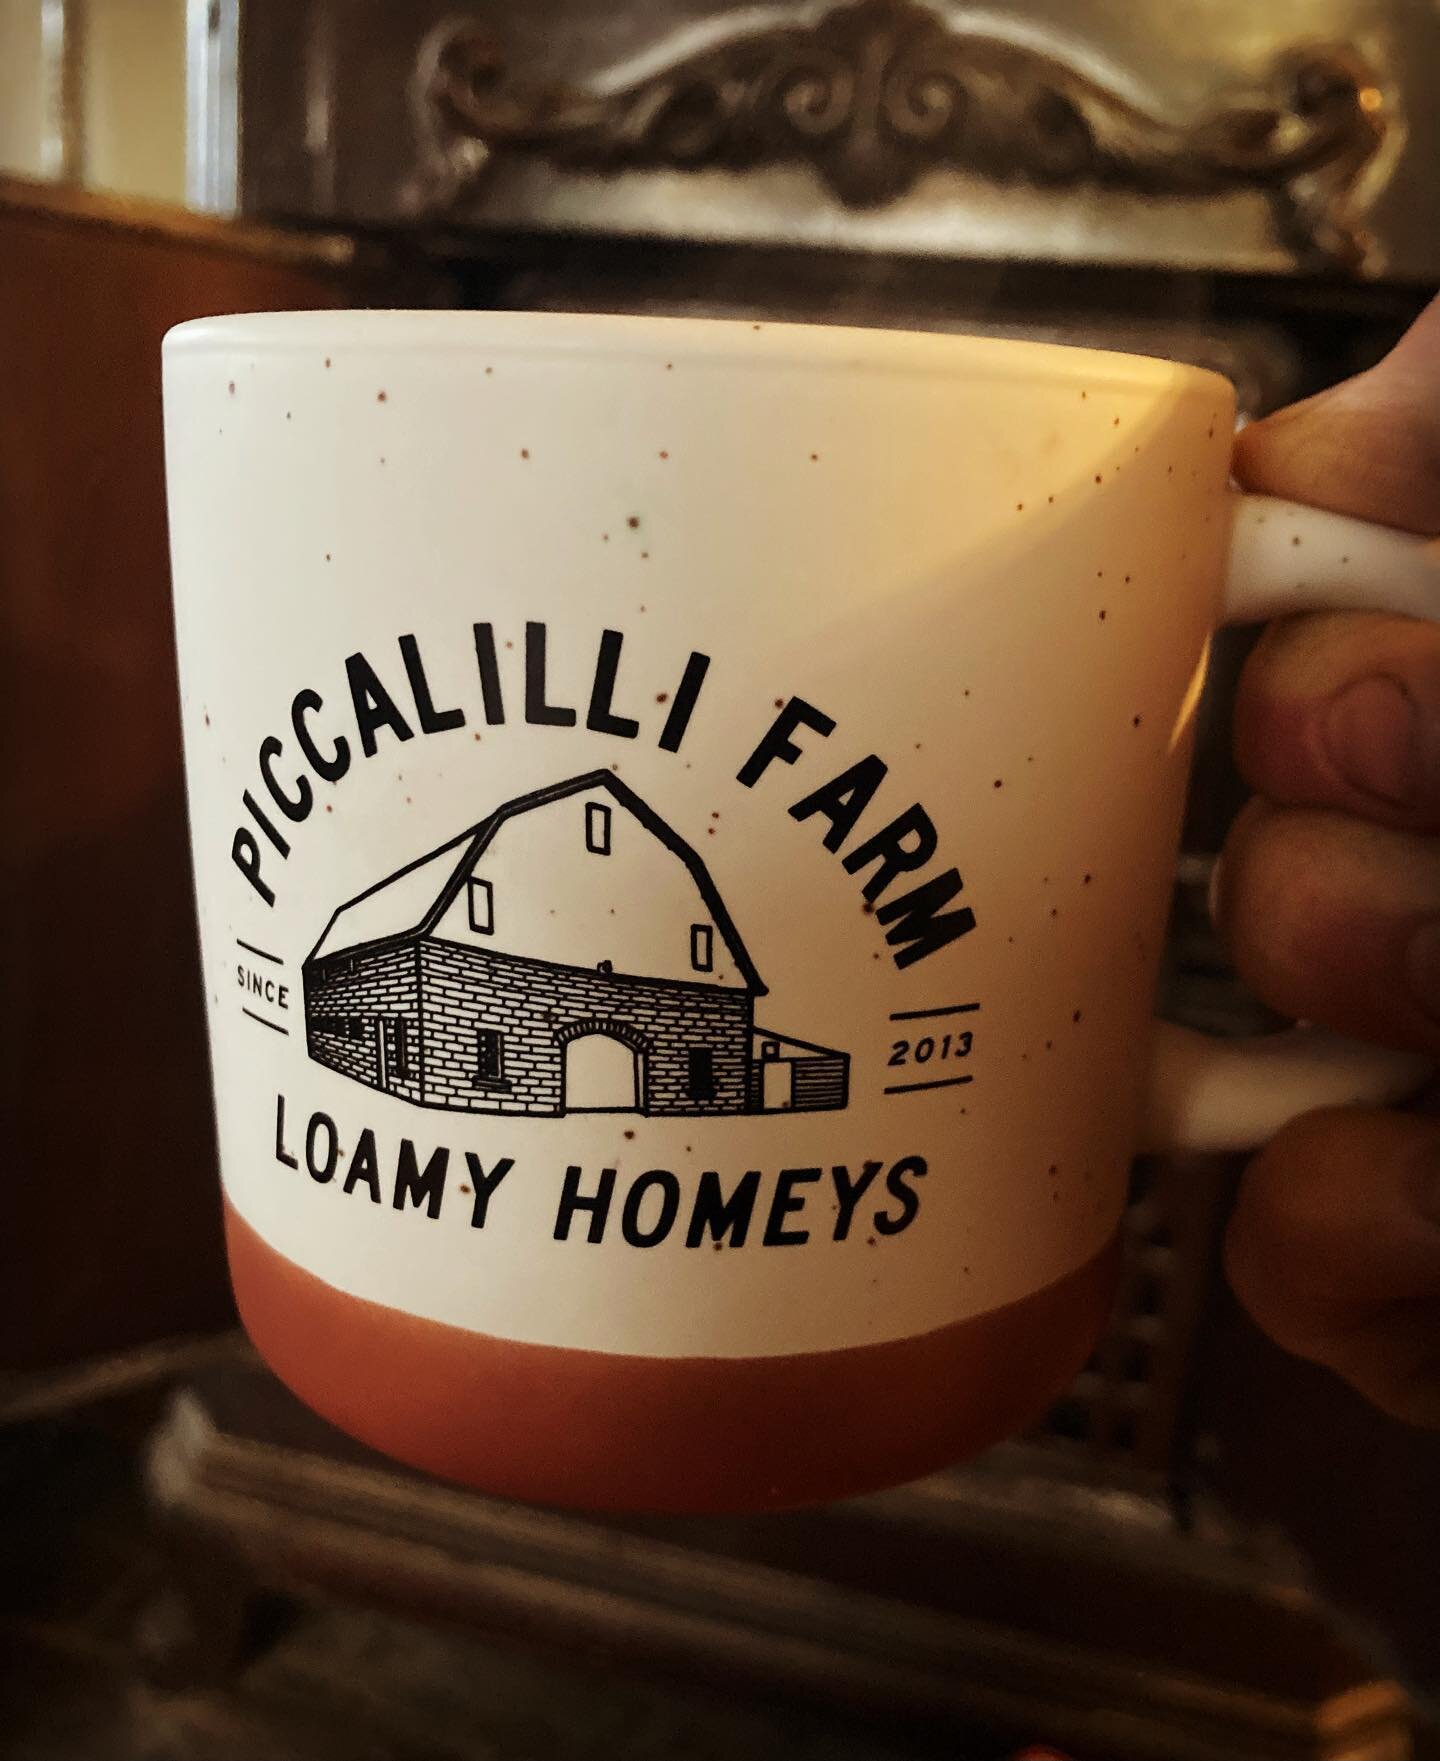 Good morning Homey&rsquo;s 🤩 it #piccalillifarm2porch ordering day! And we we have sweet *new merch* available for you 💝 not to mention a full stock of #organicallygrown greens root veggies and micros straight from our garden! You can also find:
🥬